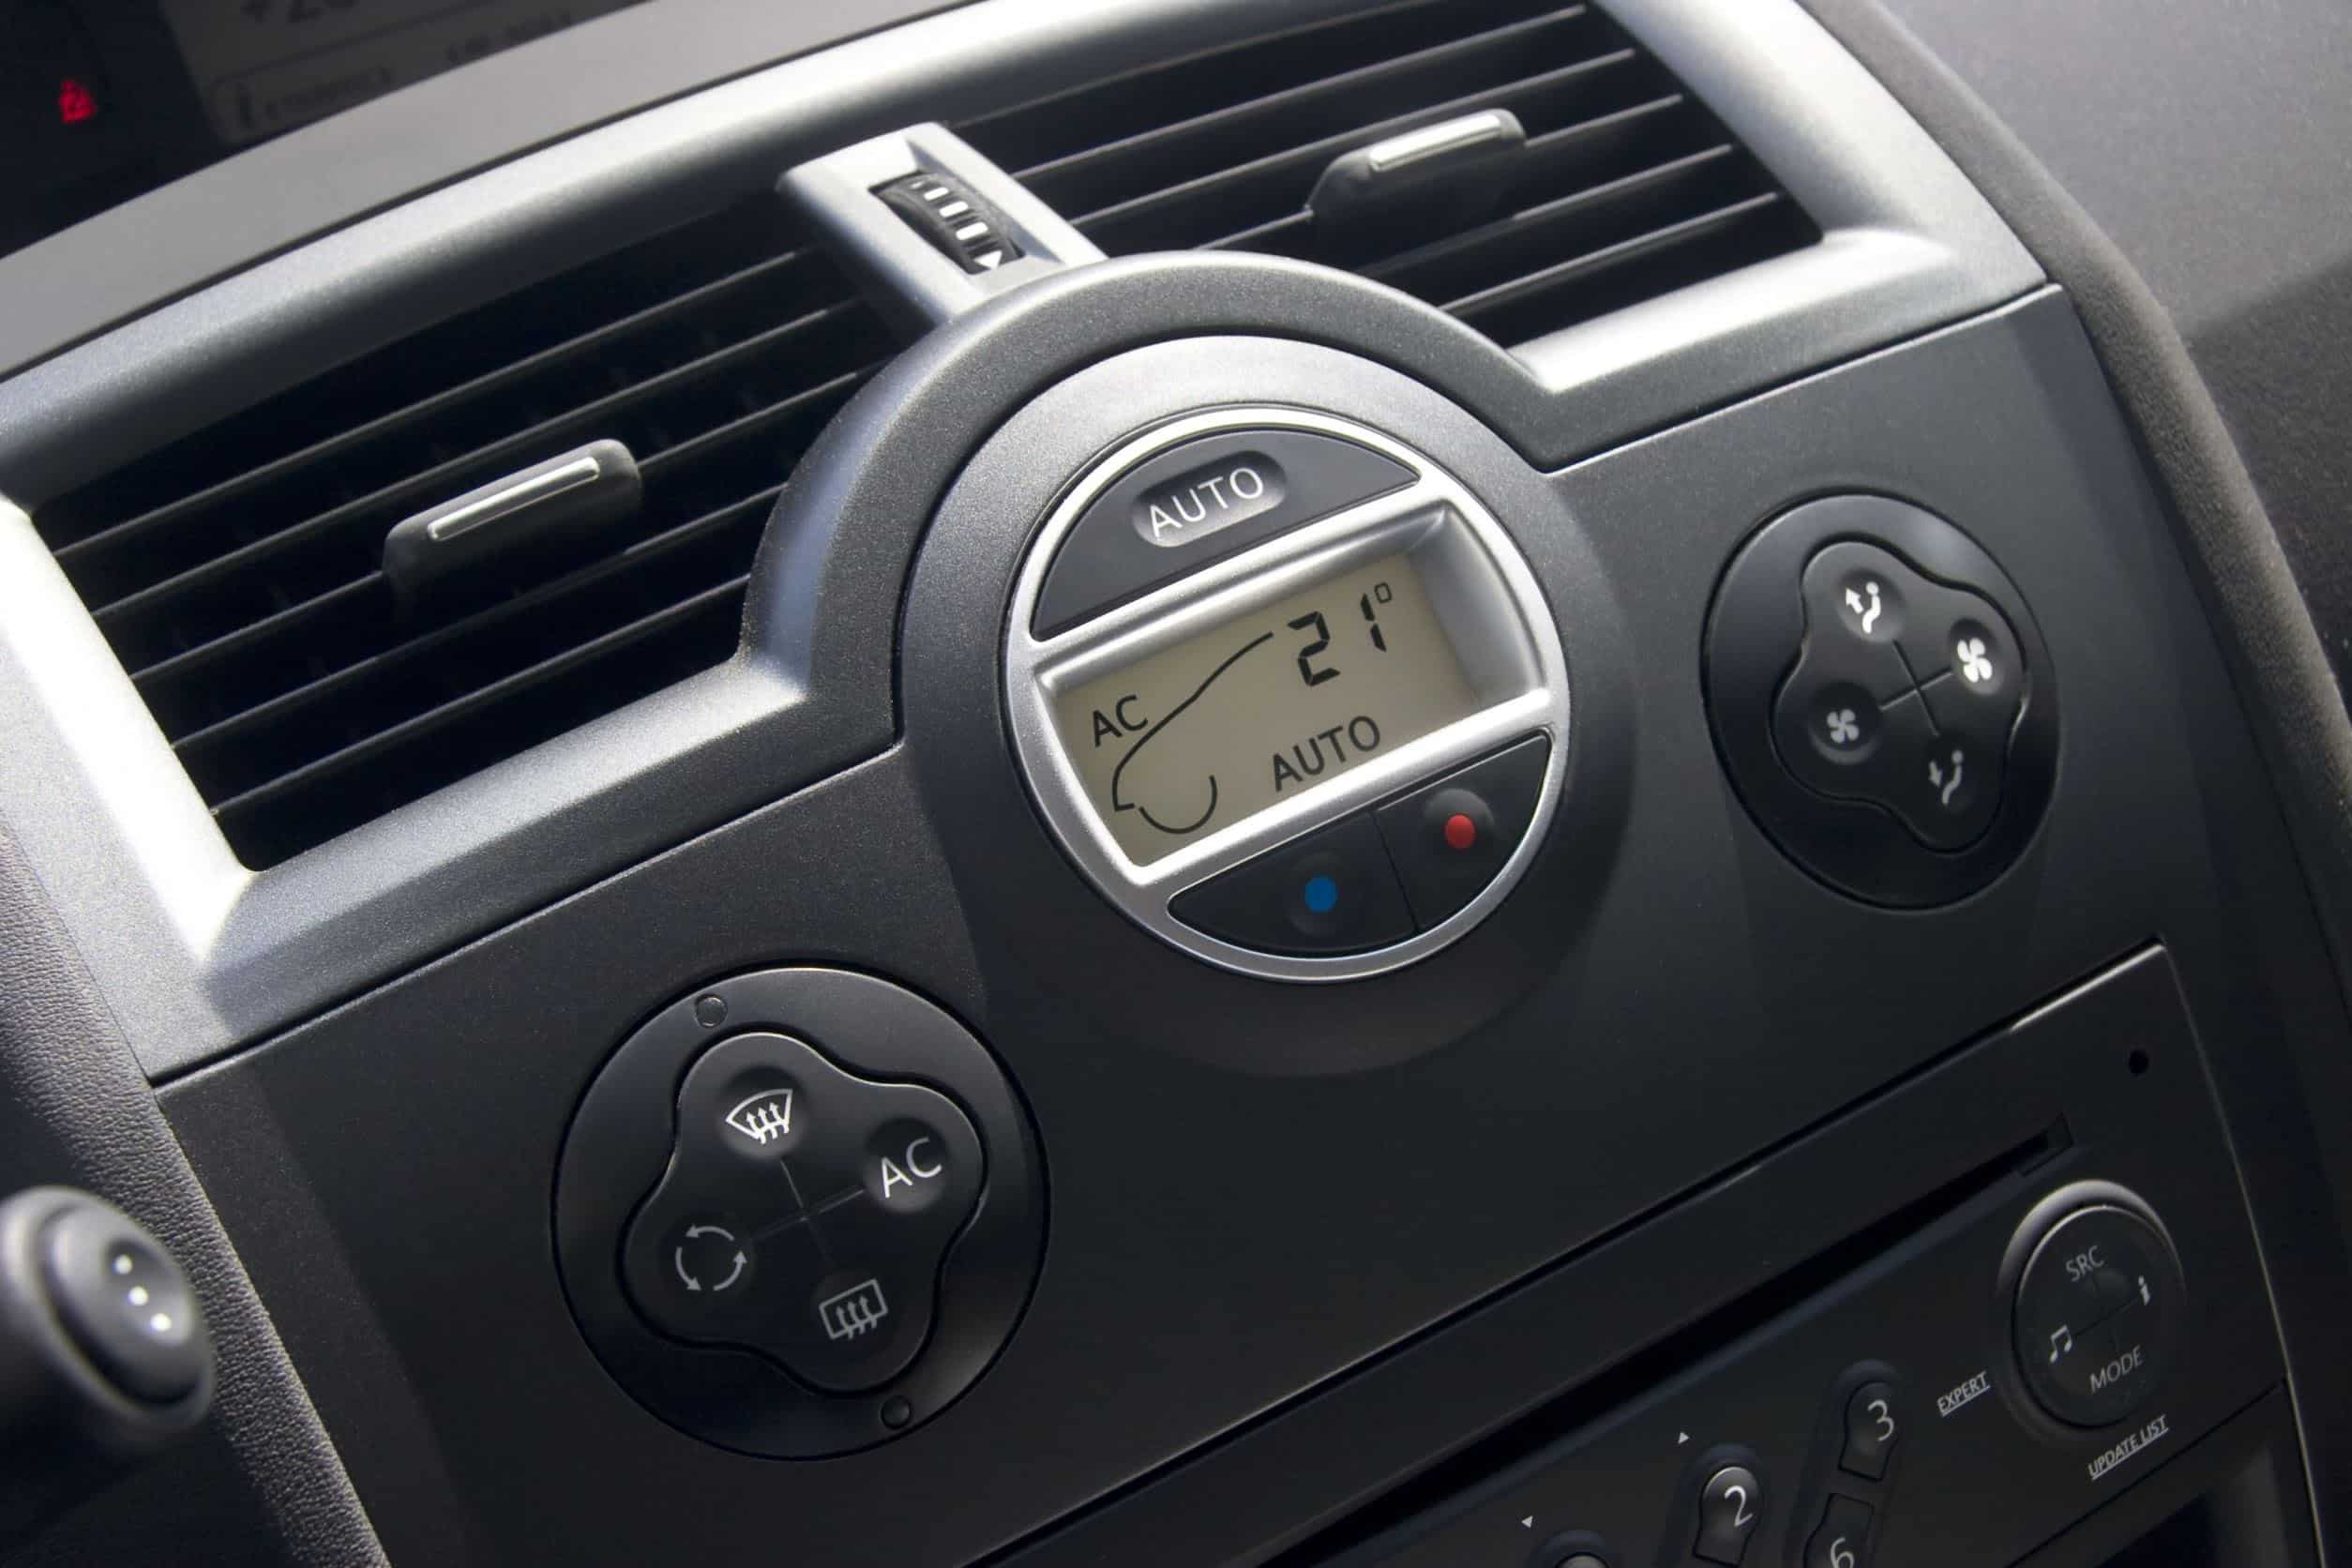 Why is My Car AC Cycling On and Off?